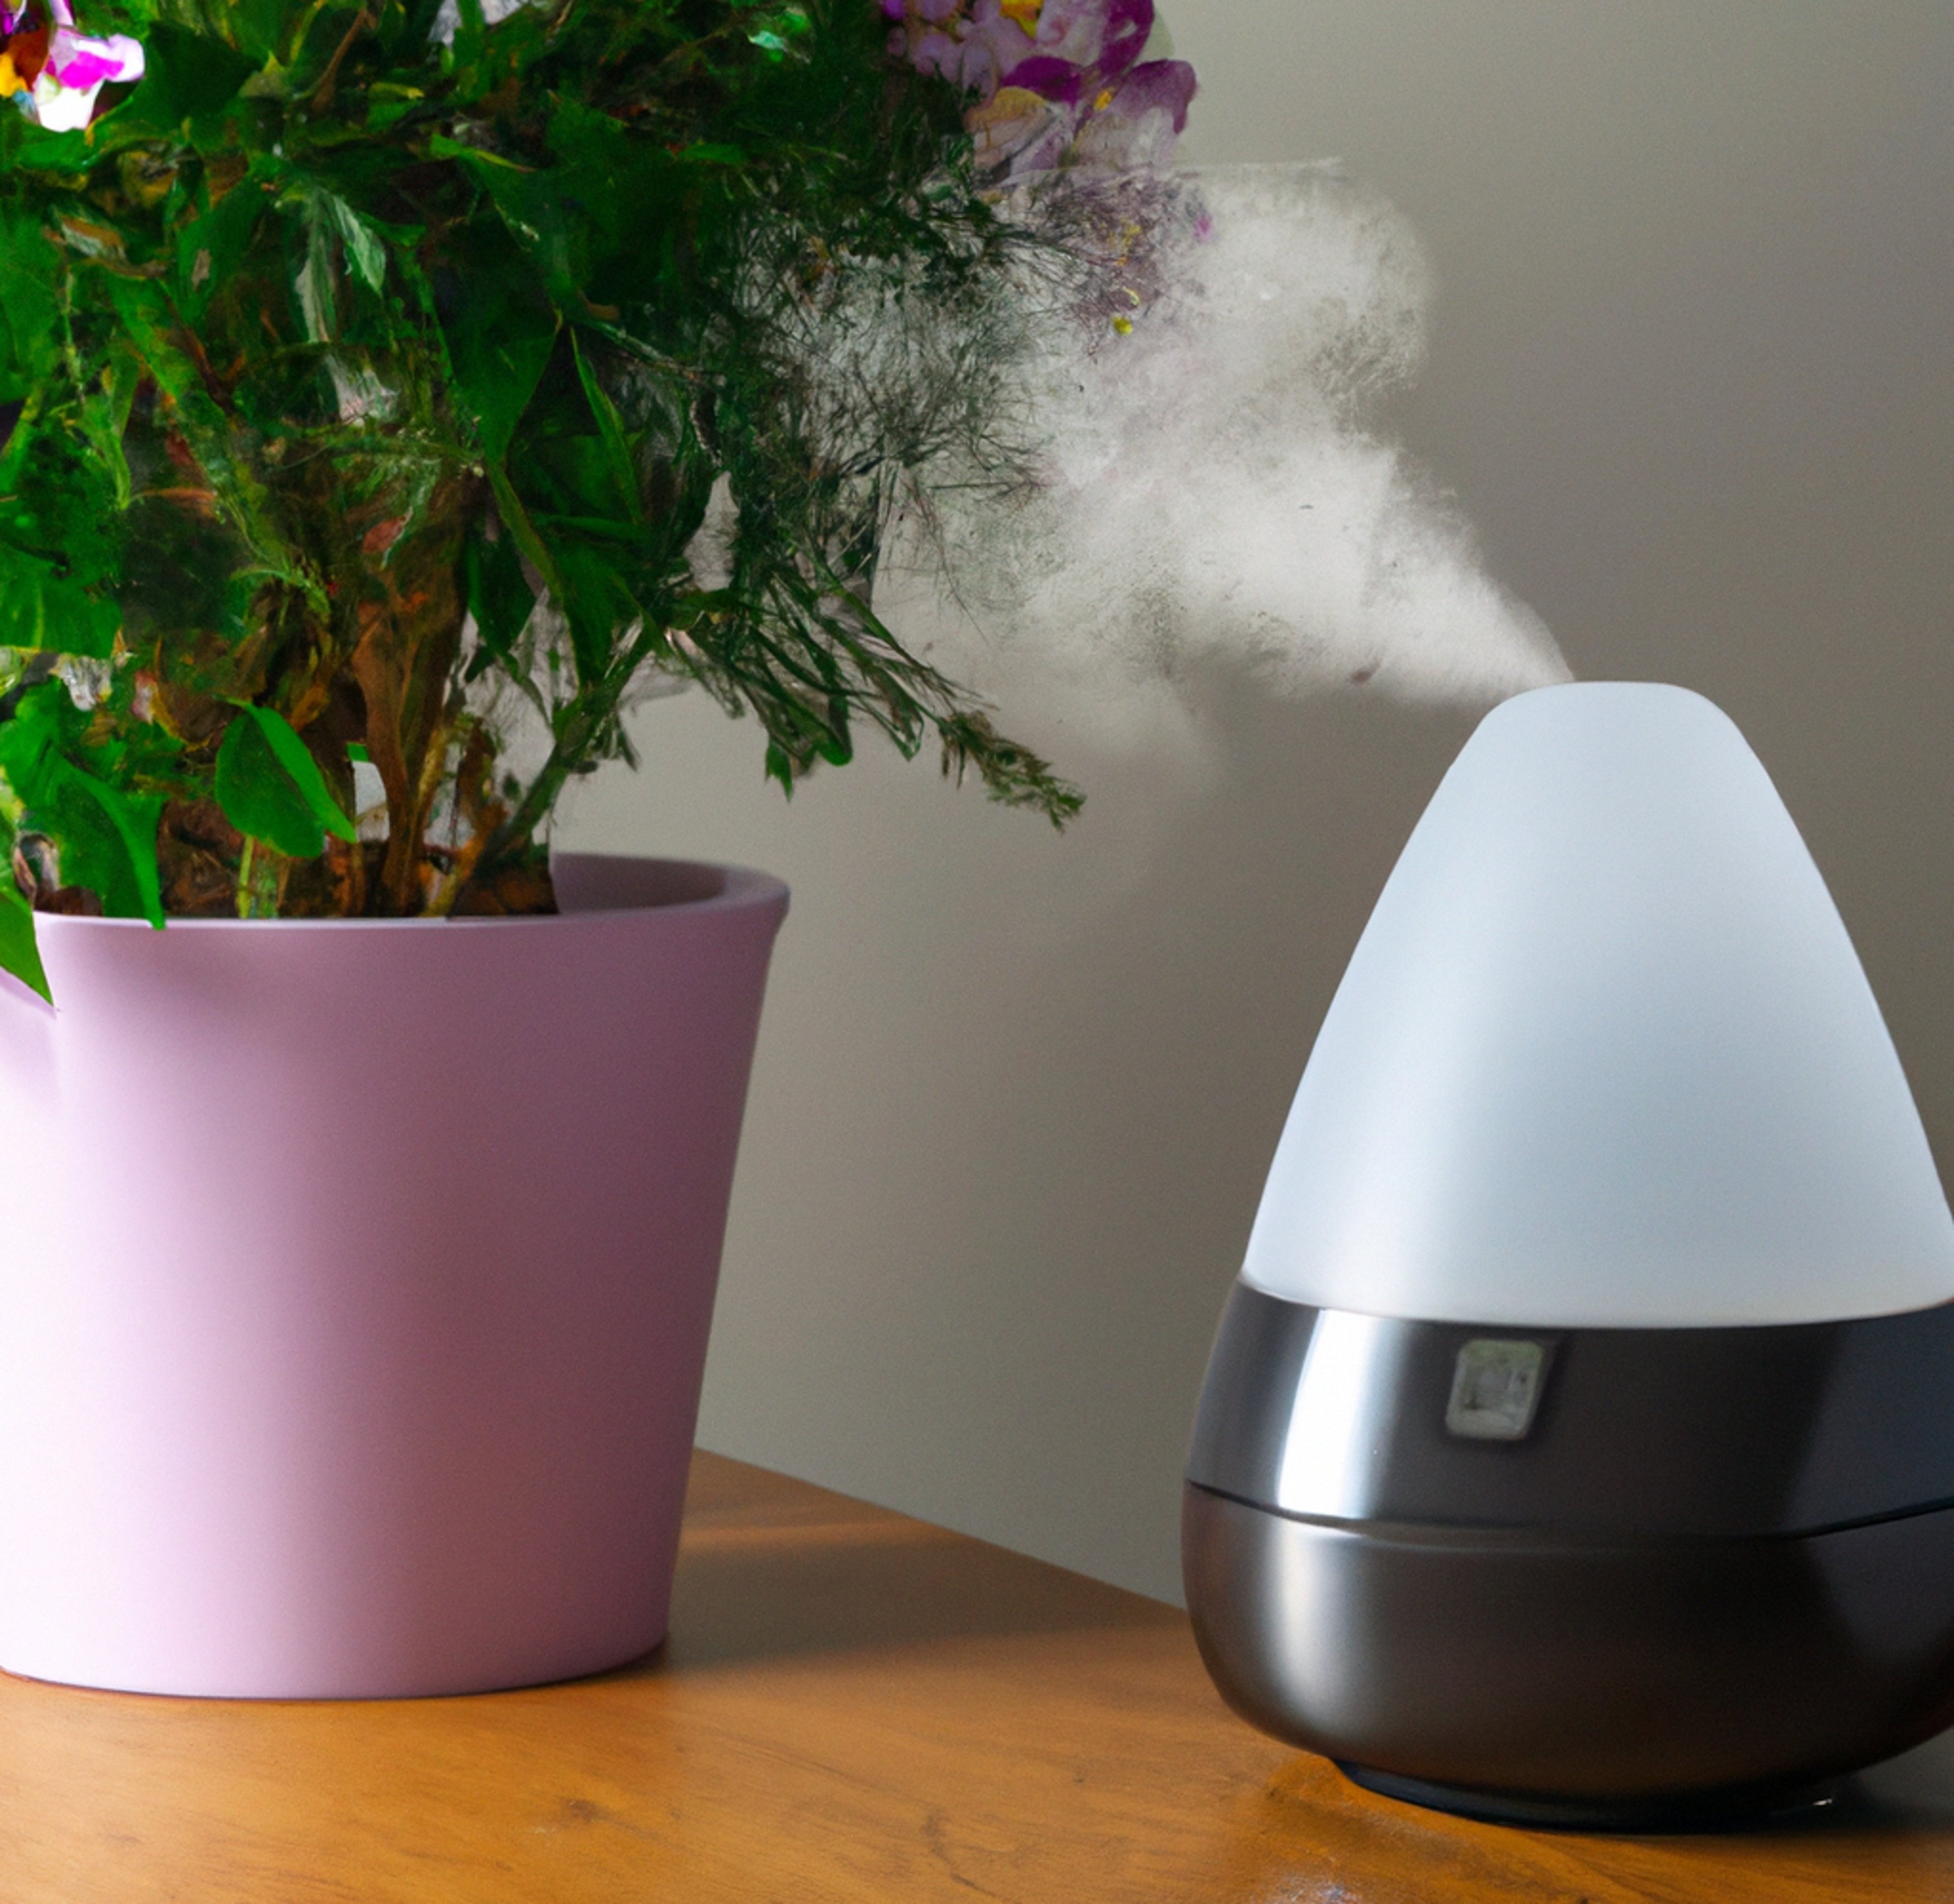 Can a Humidifier Make You Sick?